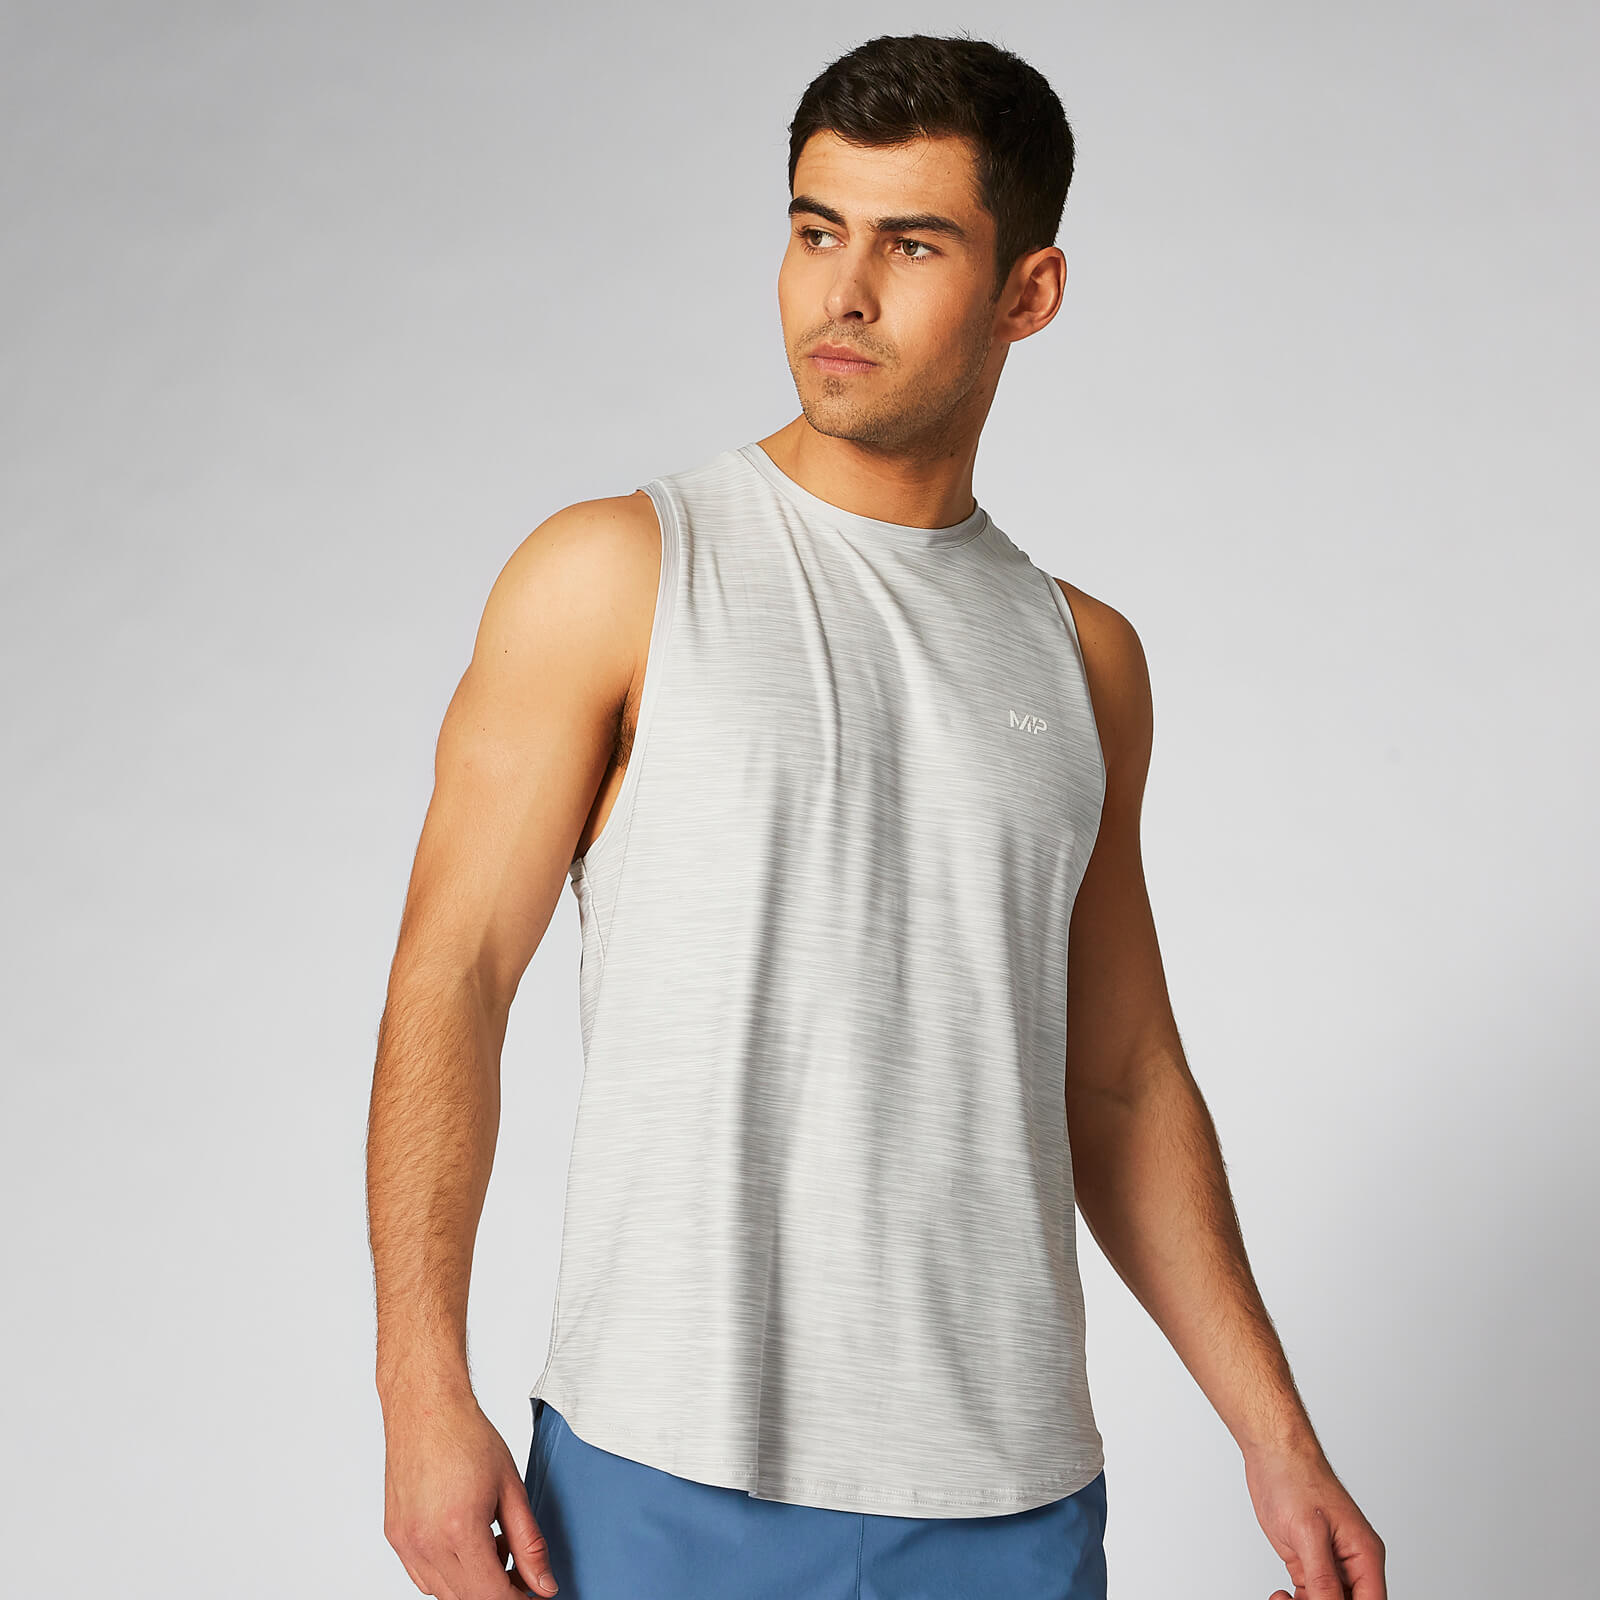 Myprotein Dry Tech Infinity Tank Top - Silver Marl - S